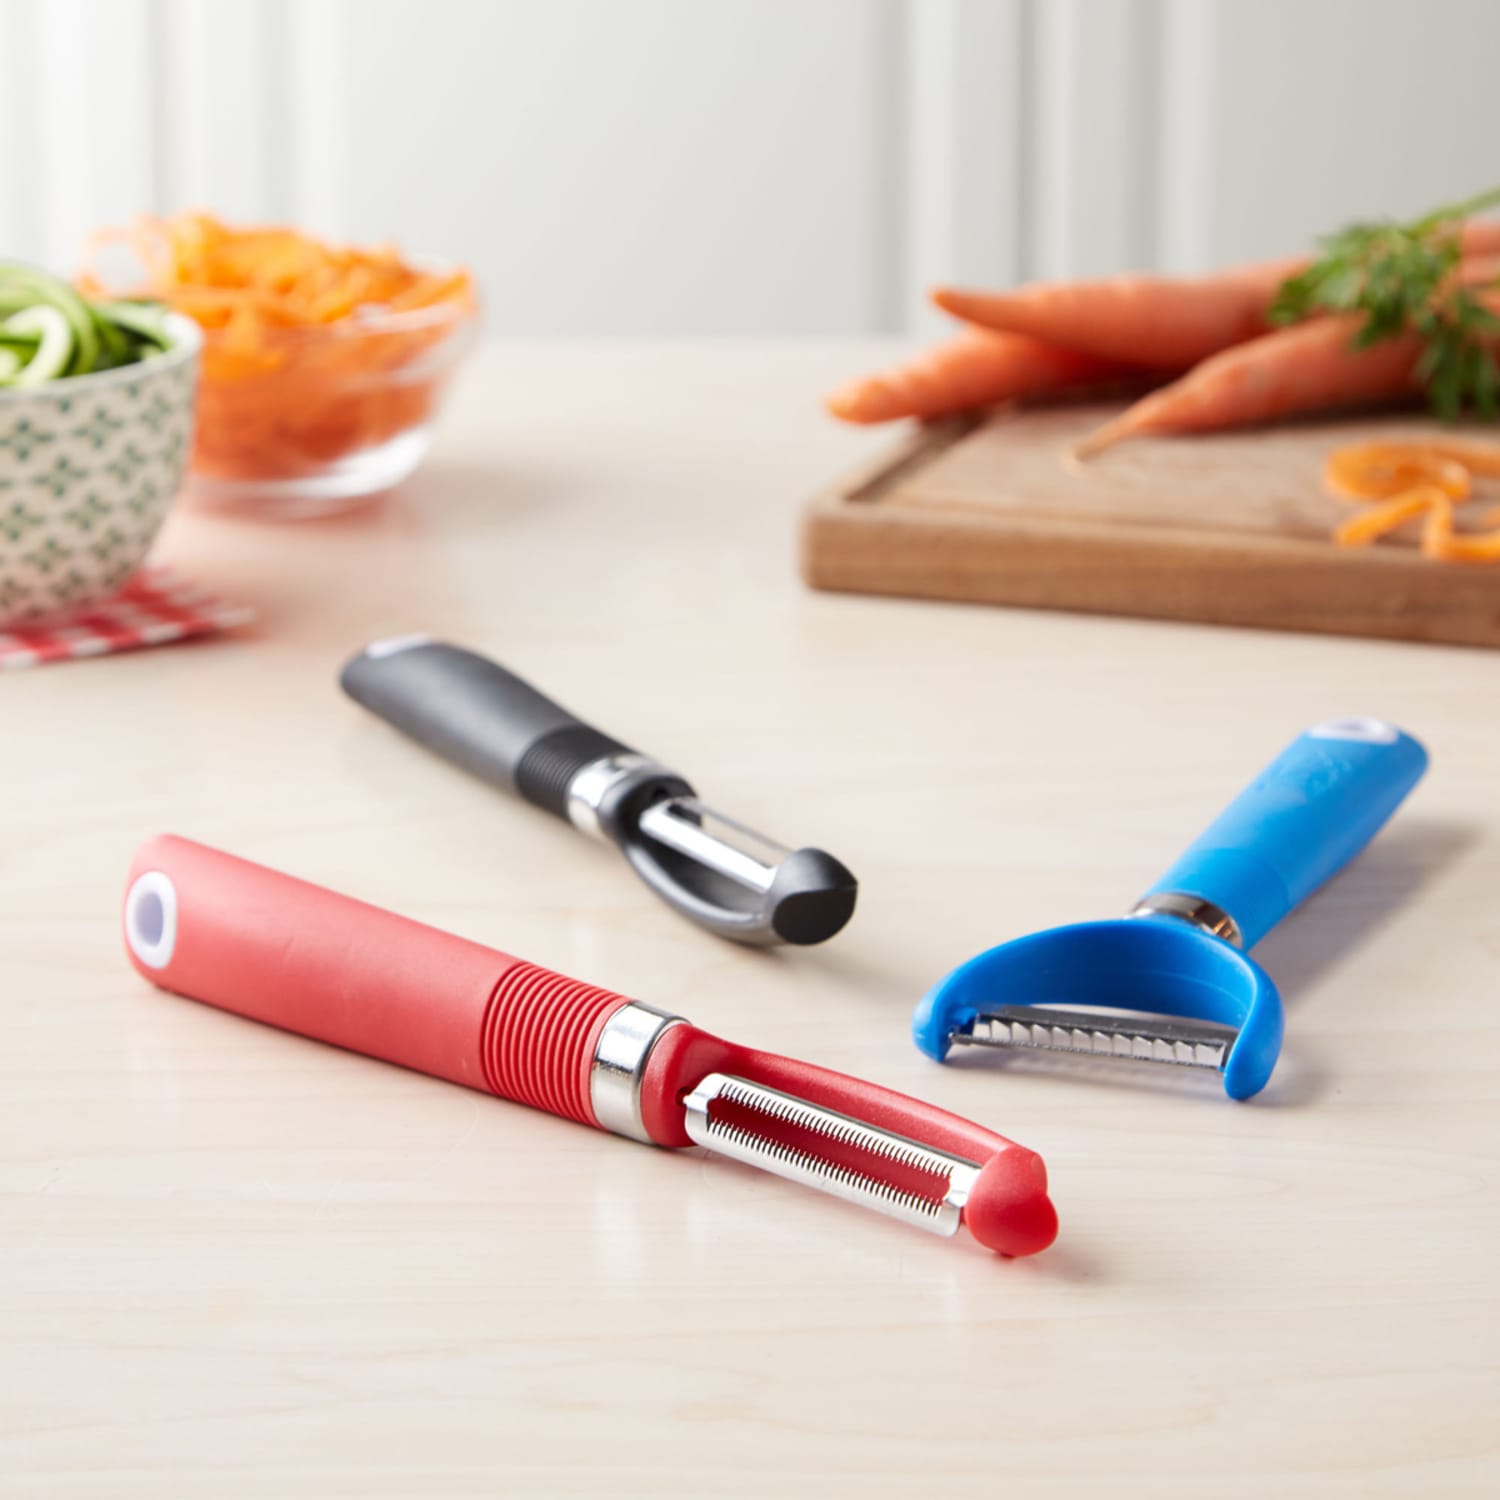 6 Clever Ways to Use a Vegetable Peeler